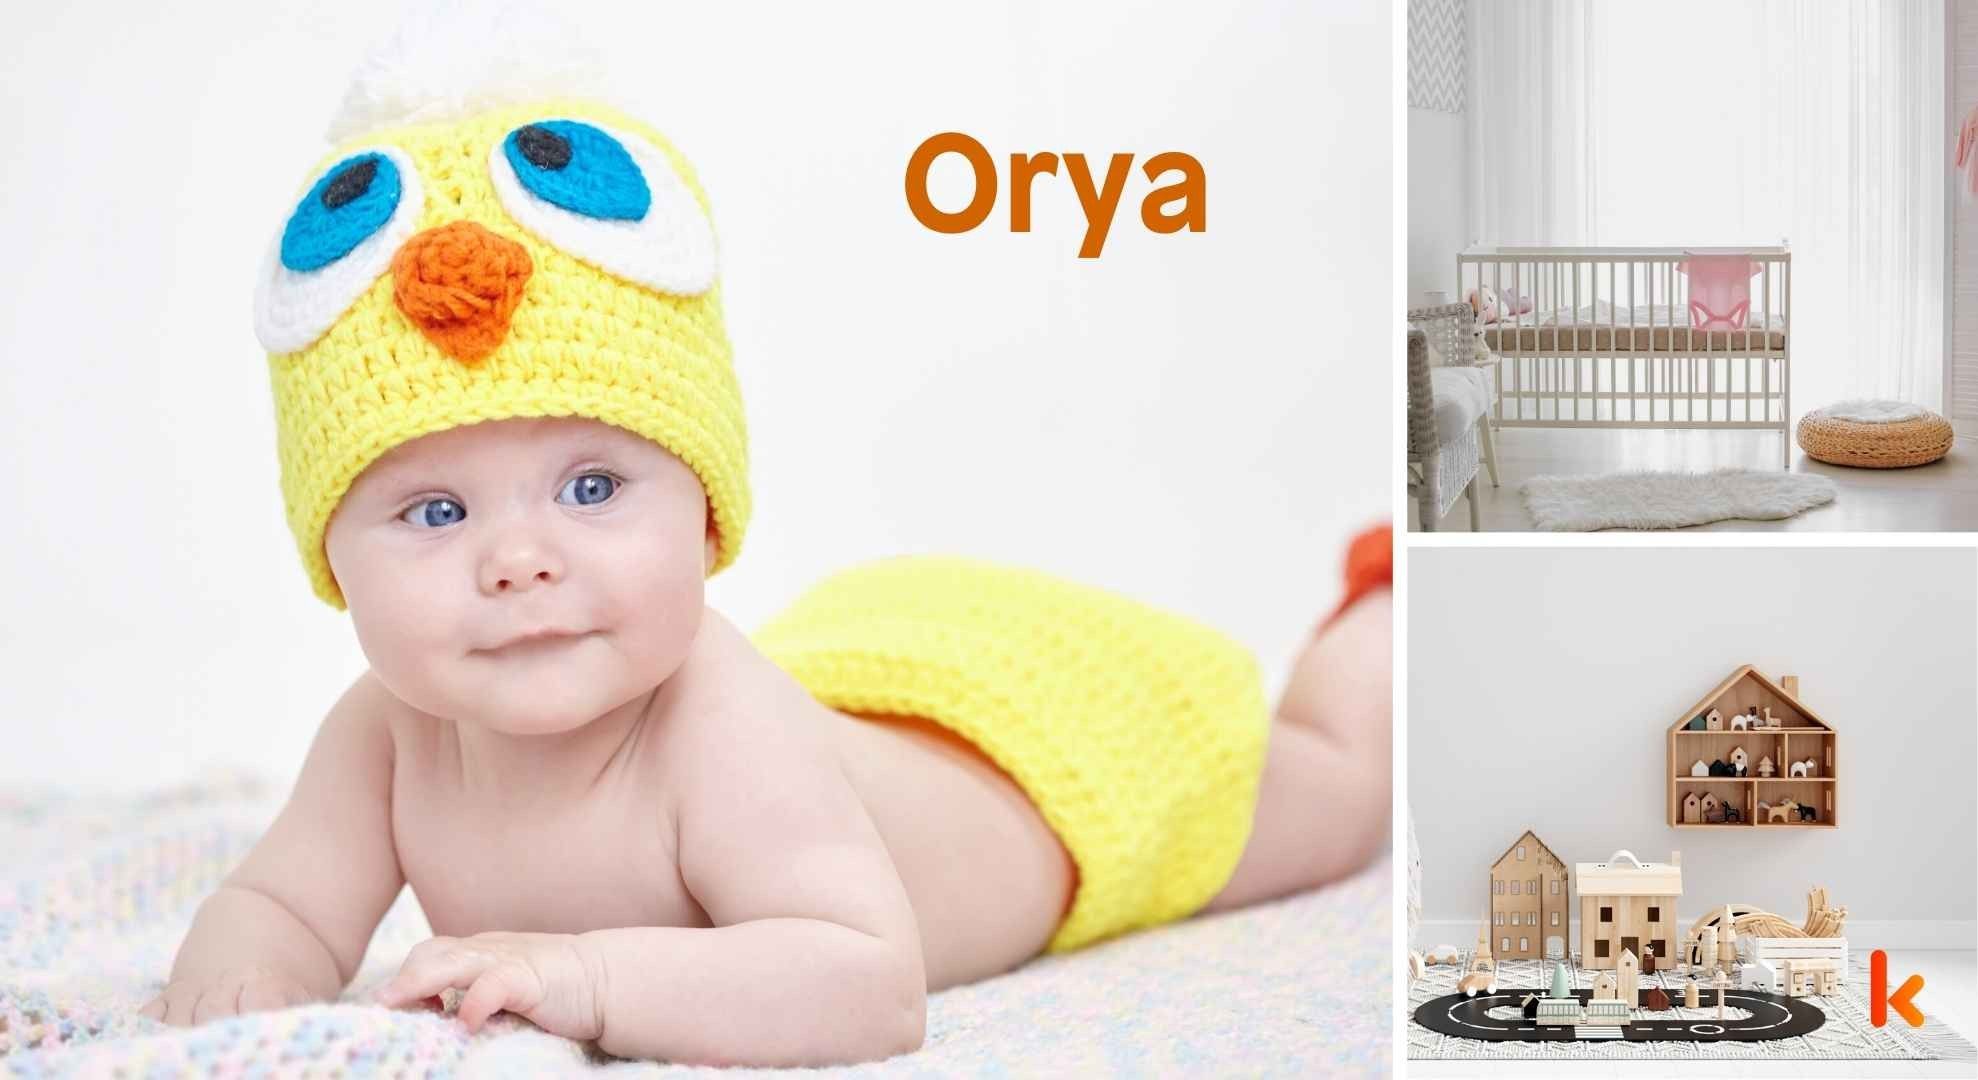 Meaning of the name Orya